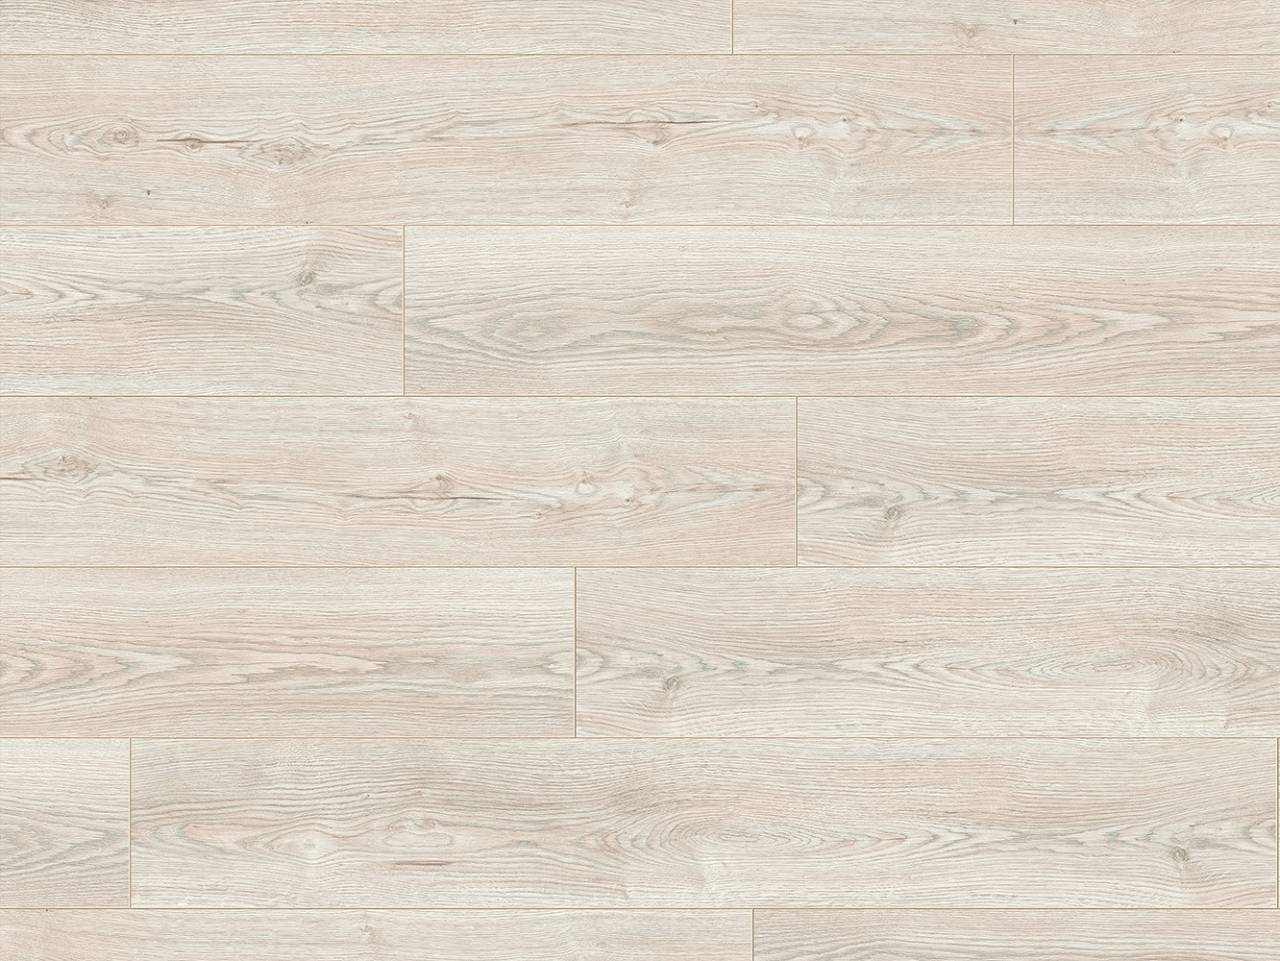 Close-up of 'K484 Misty Sterling Oak' flooring, showcasing detailed grain patterns and soft grey hues.